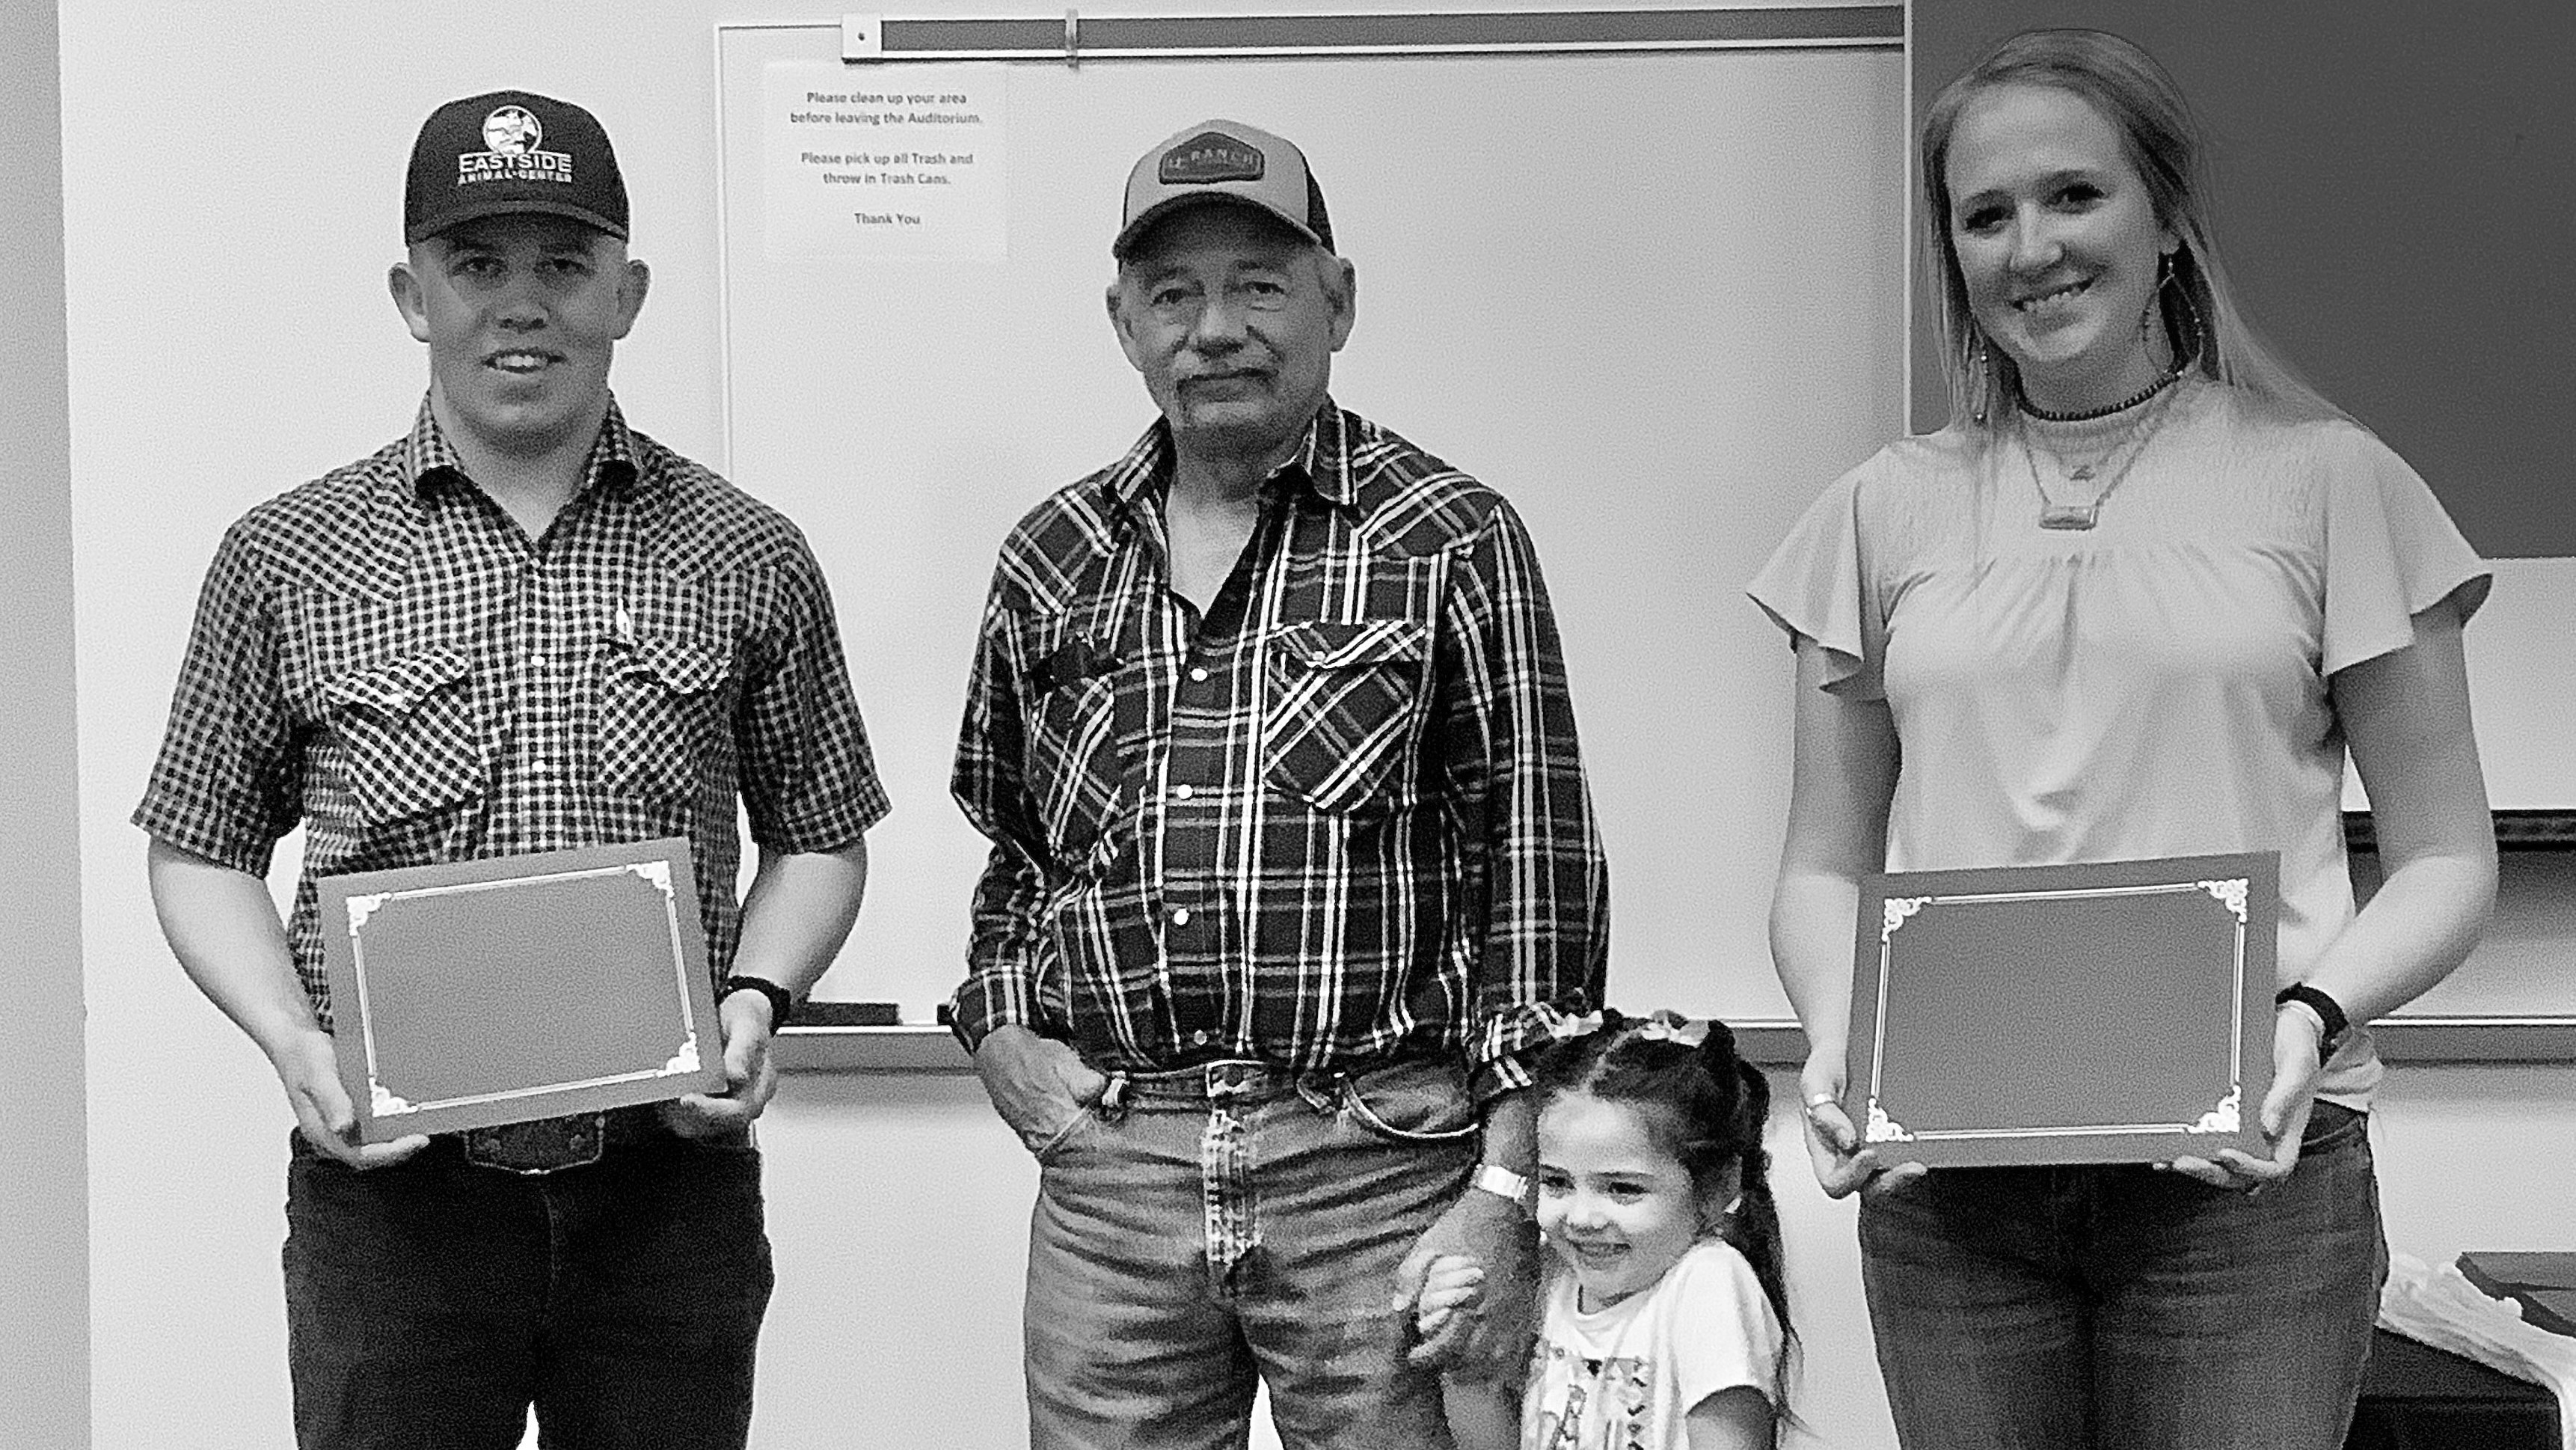 The Castle family presented the scholarship awards to Donald Rohr, Frontier County, and Tailyn Thompson, Genoa, CO.